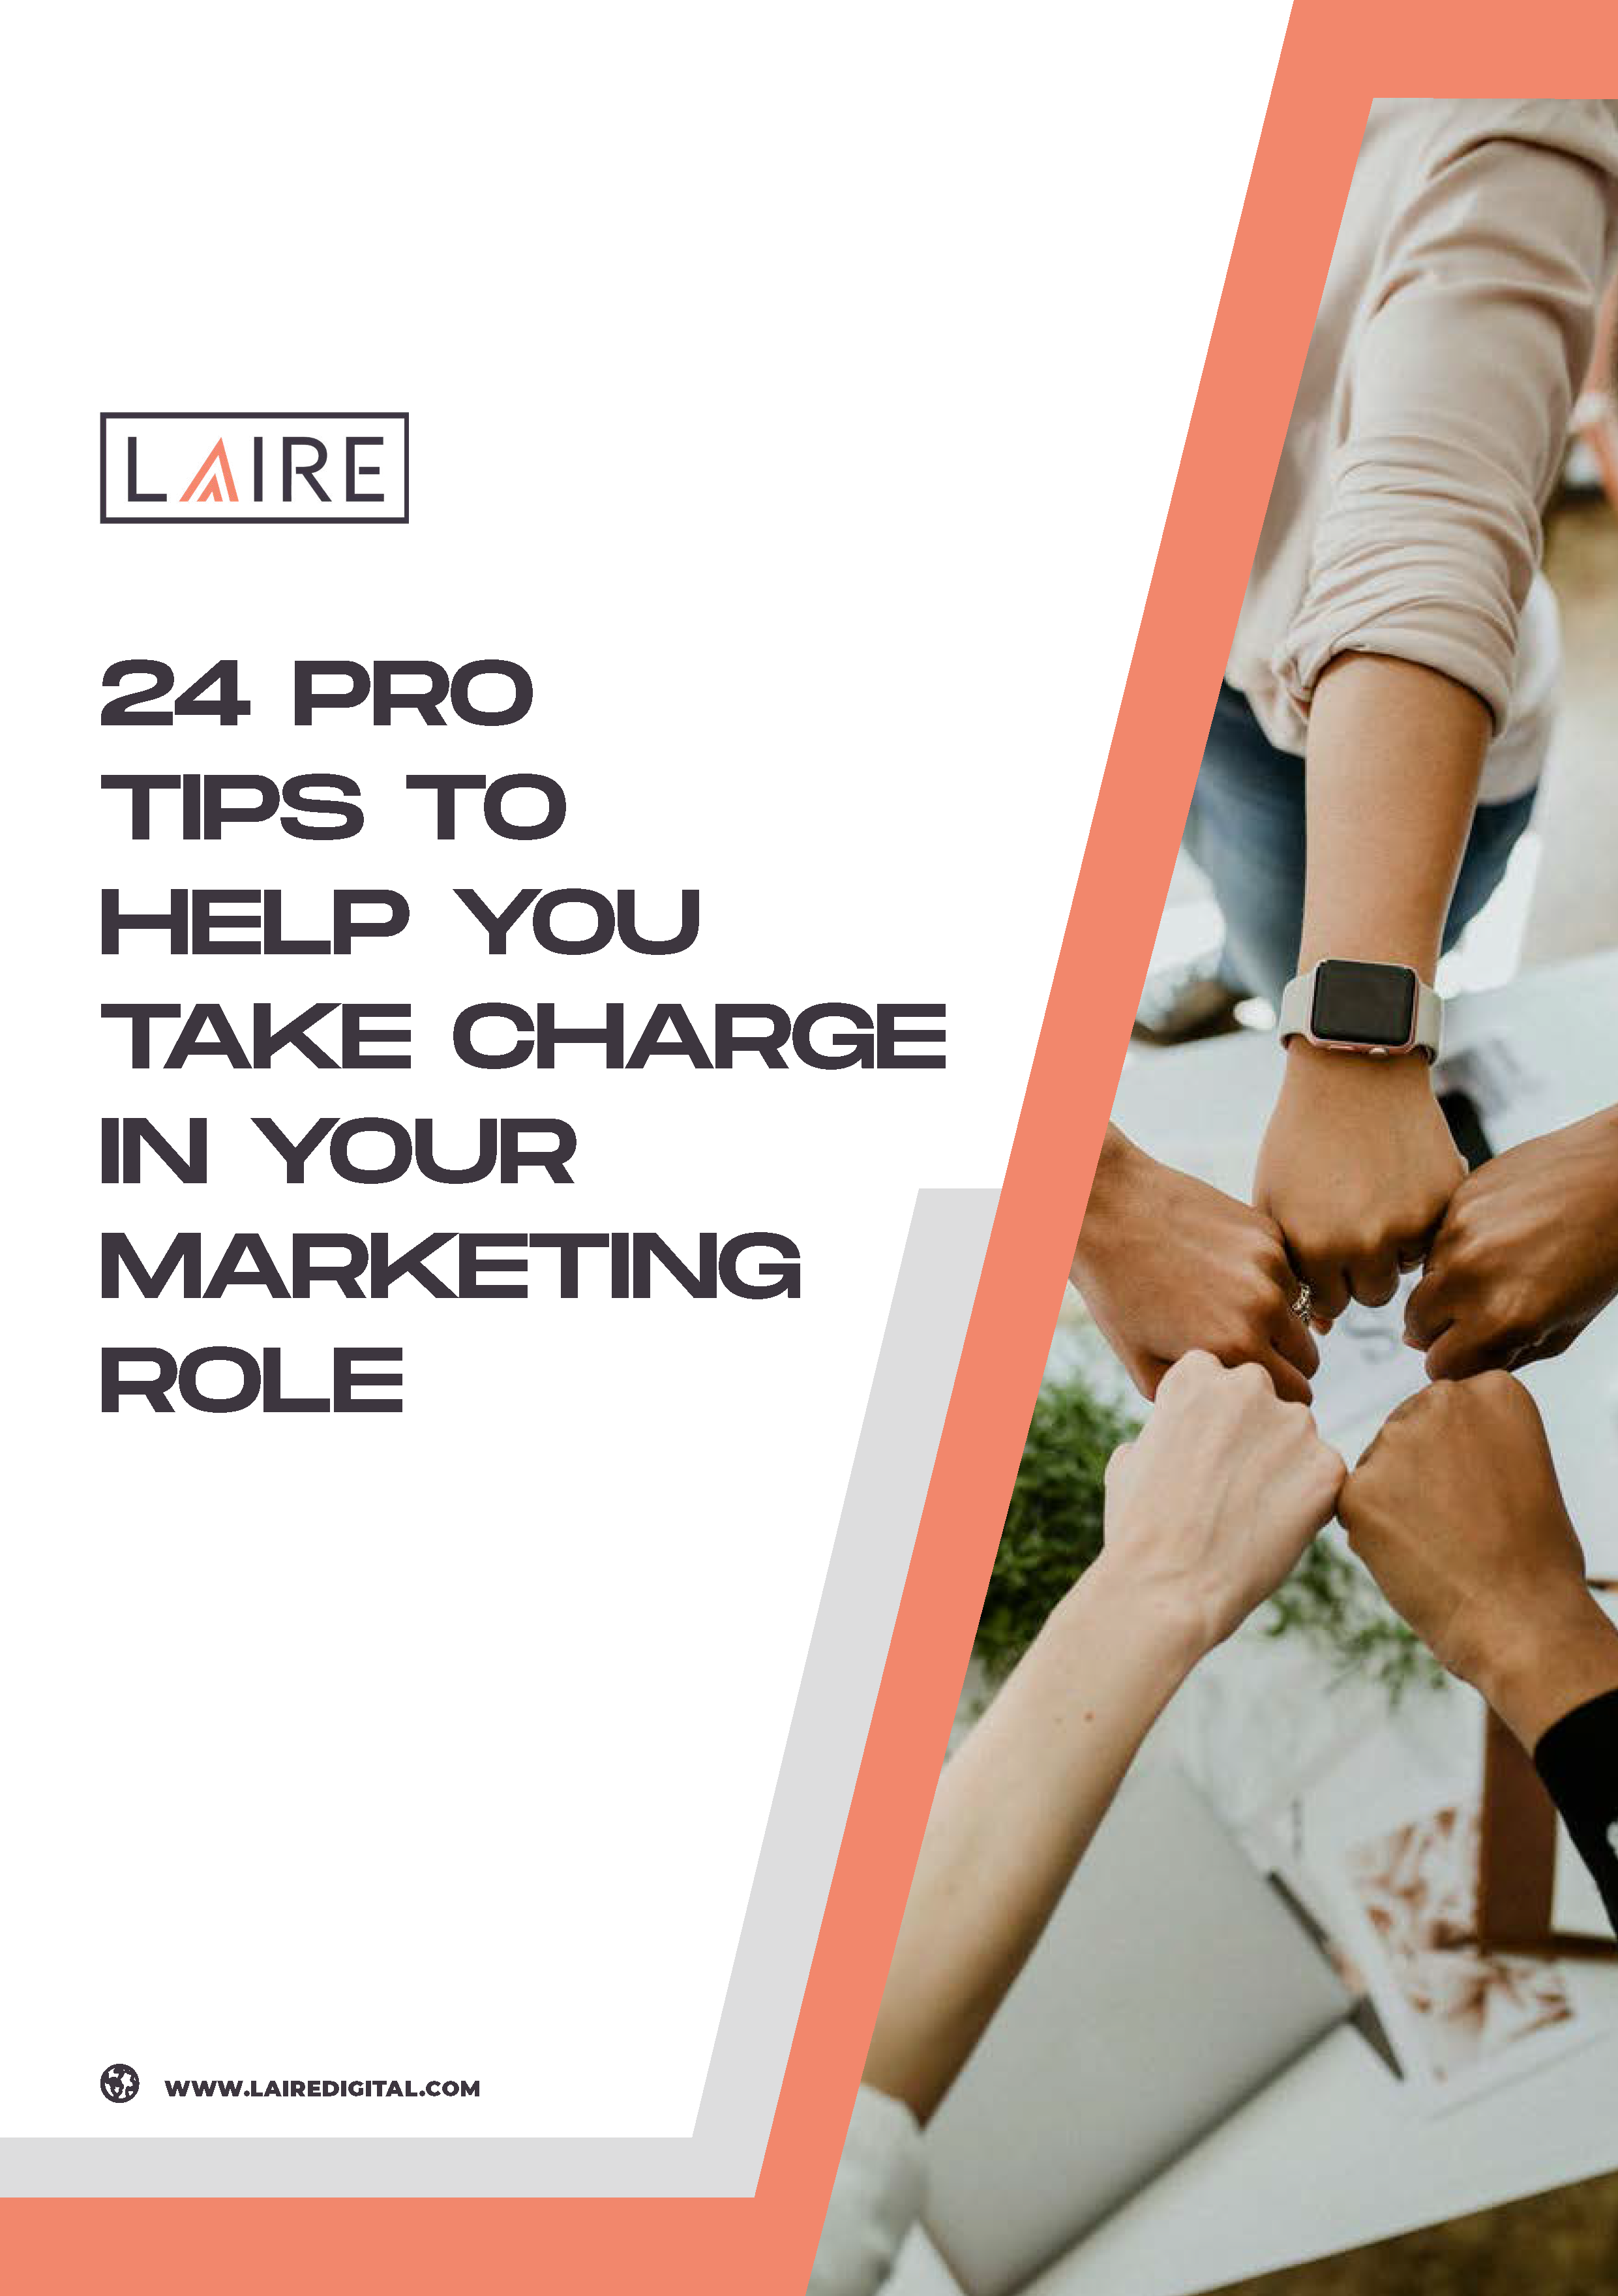 LAIRE 24 Pro Tips Cover-1 -1